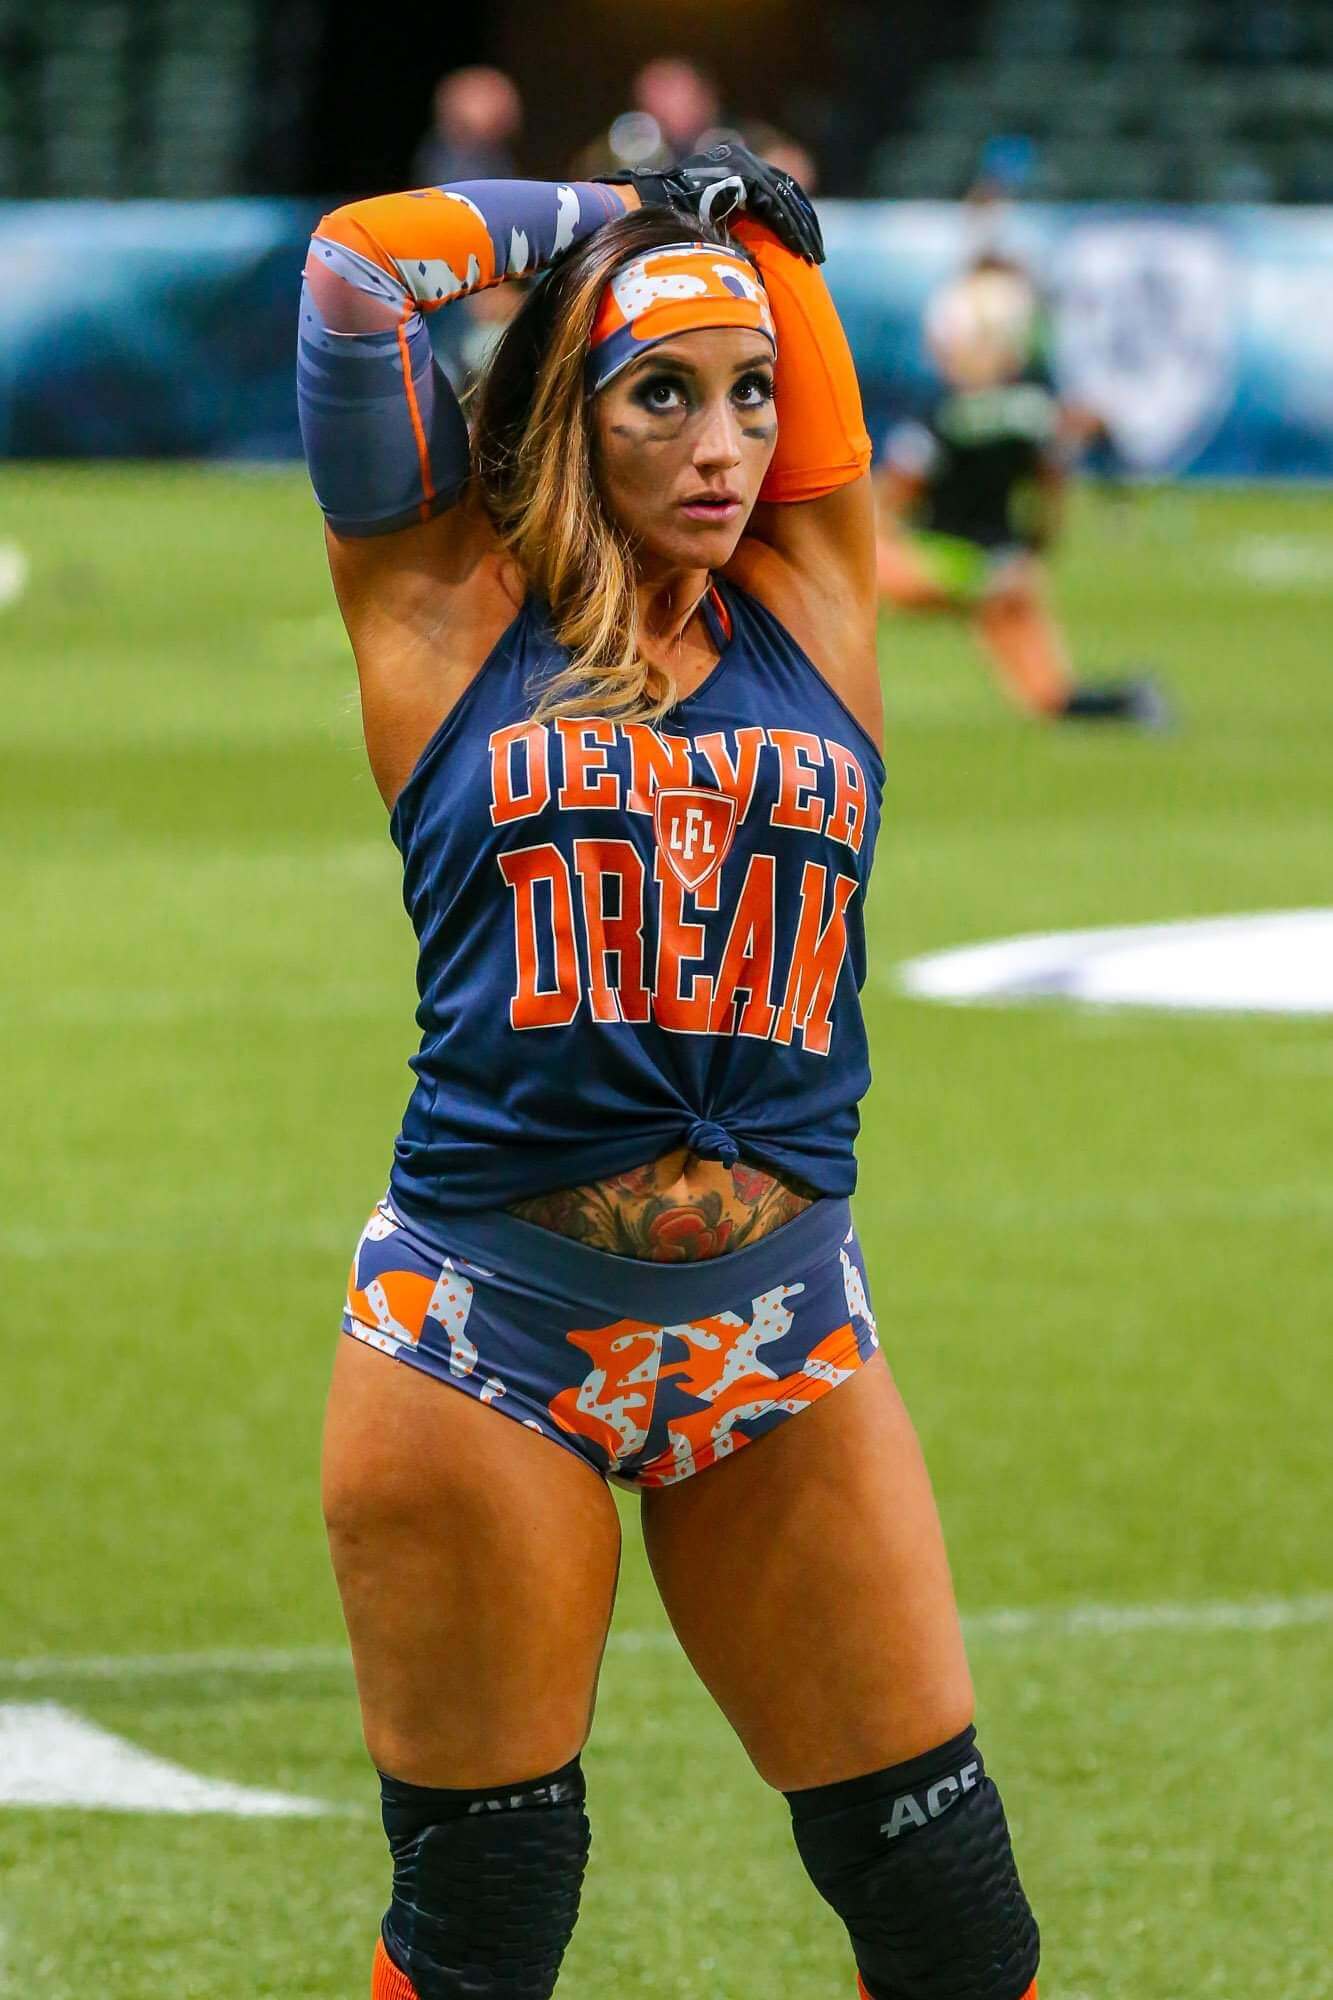 The Legends Football League Beautiful Women And Football, Need We Say Anymore! 79